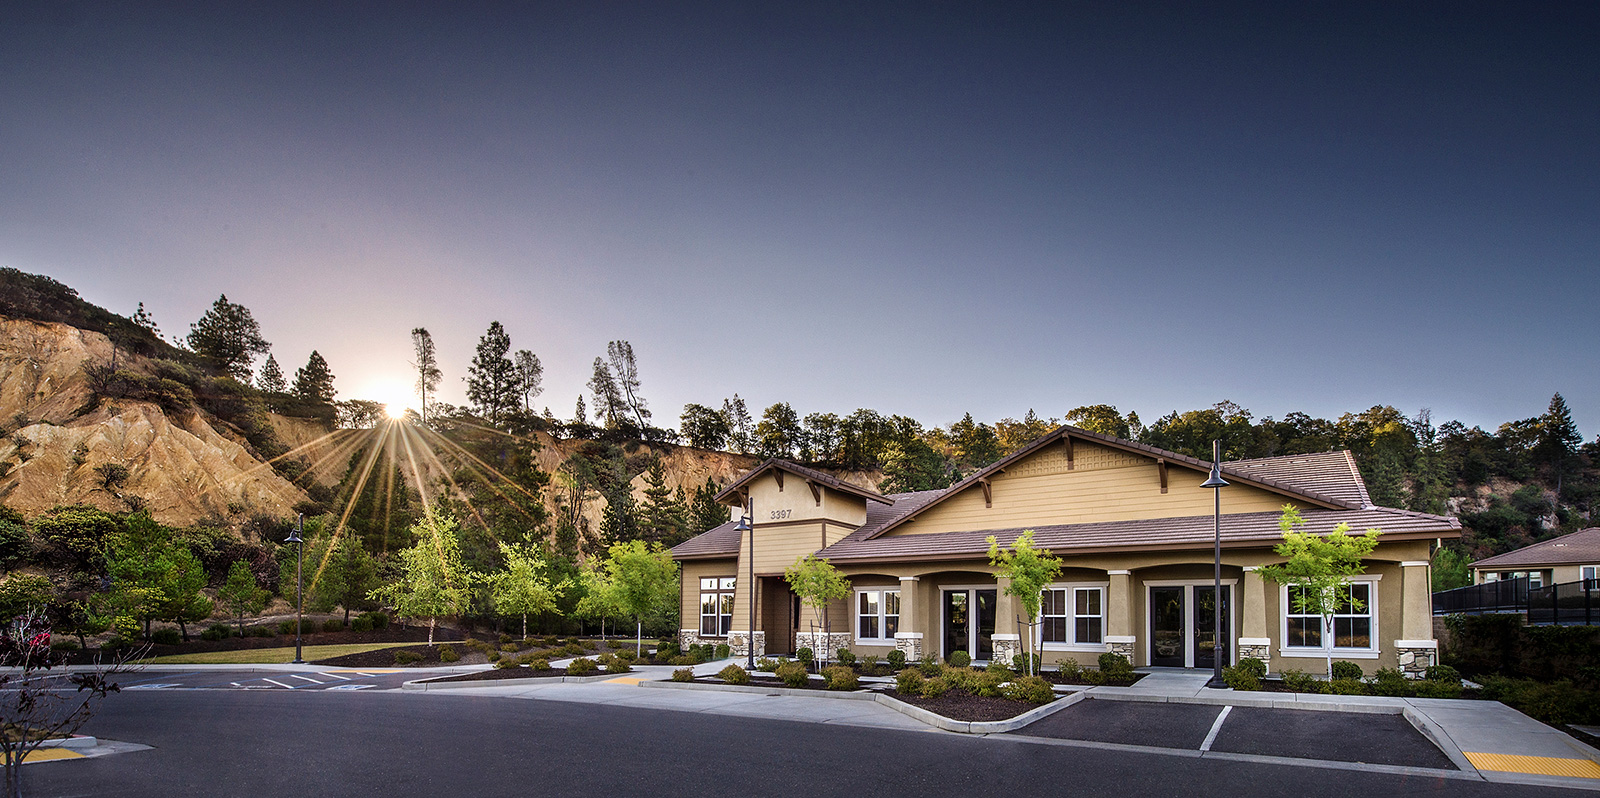 More Than Meets the Eye at Silverado Village in Placerville